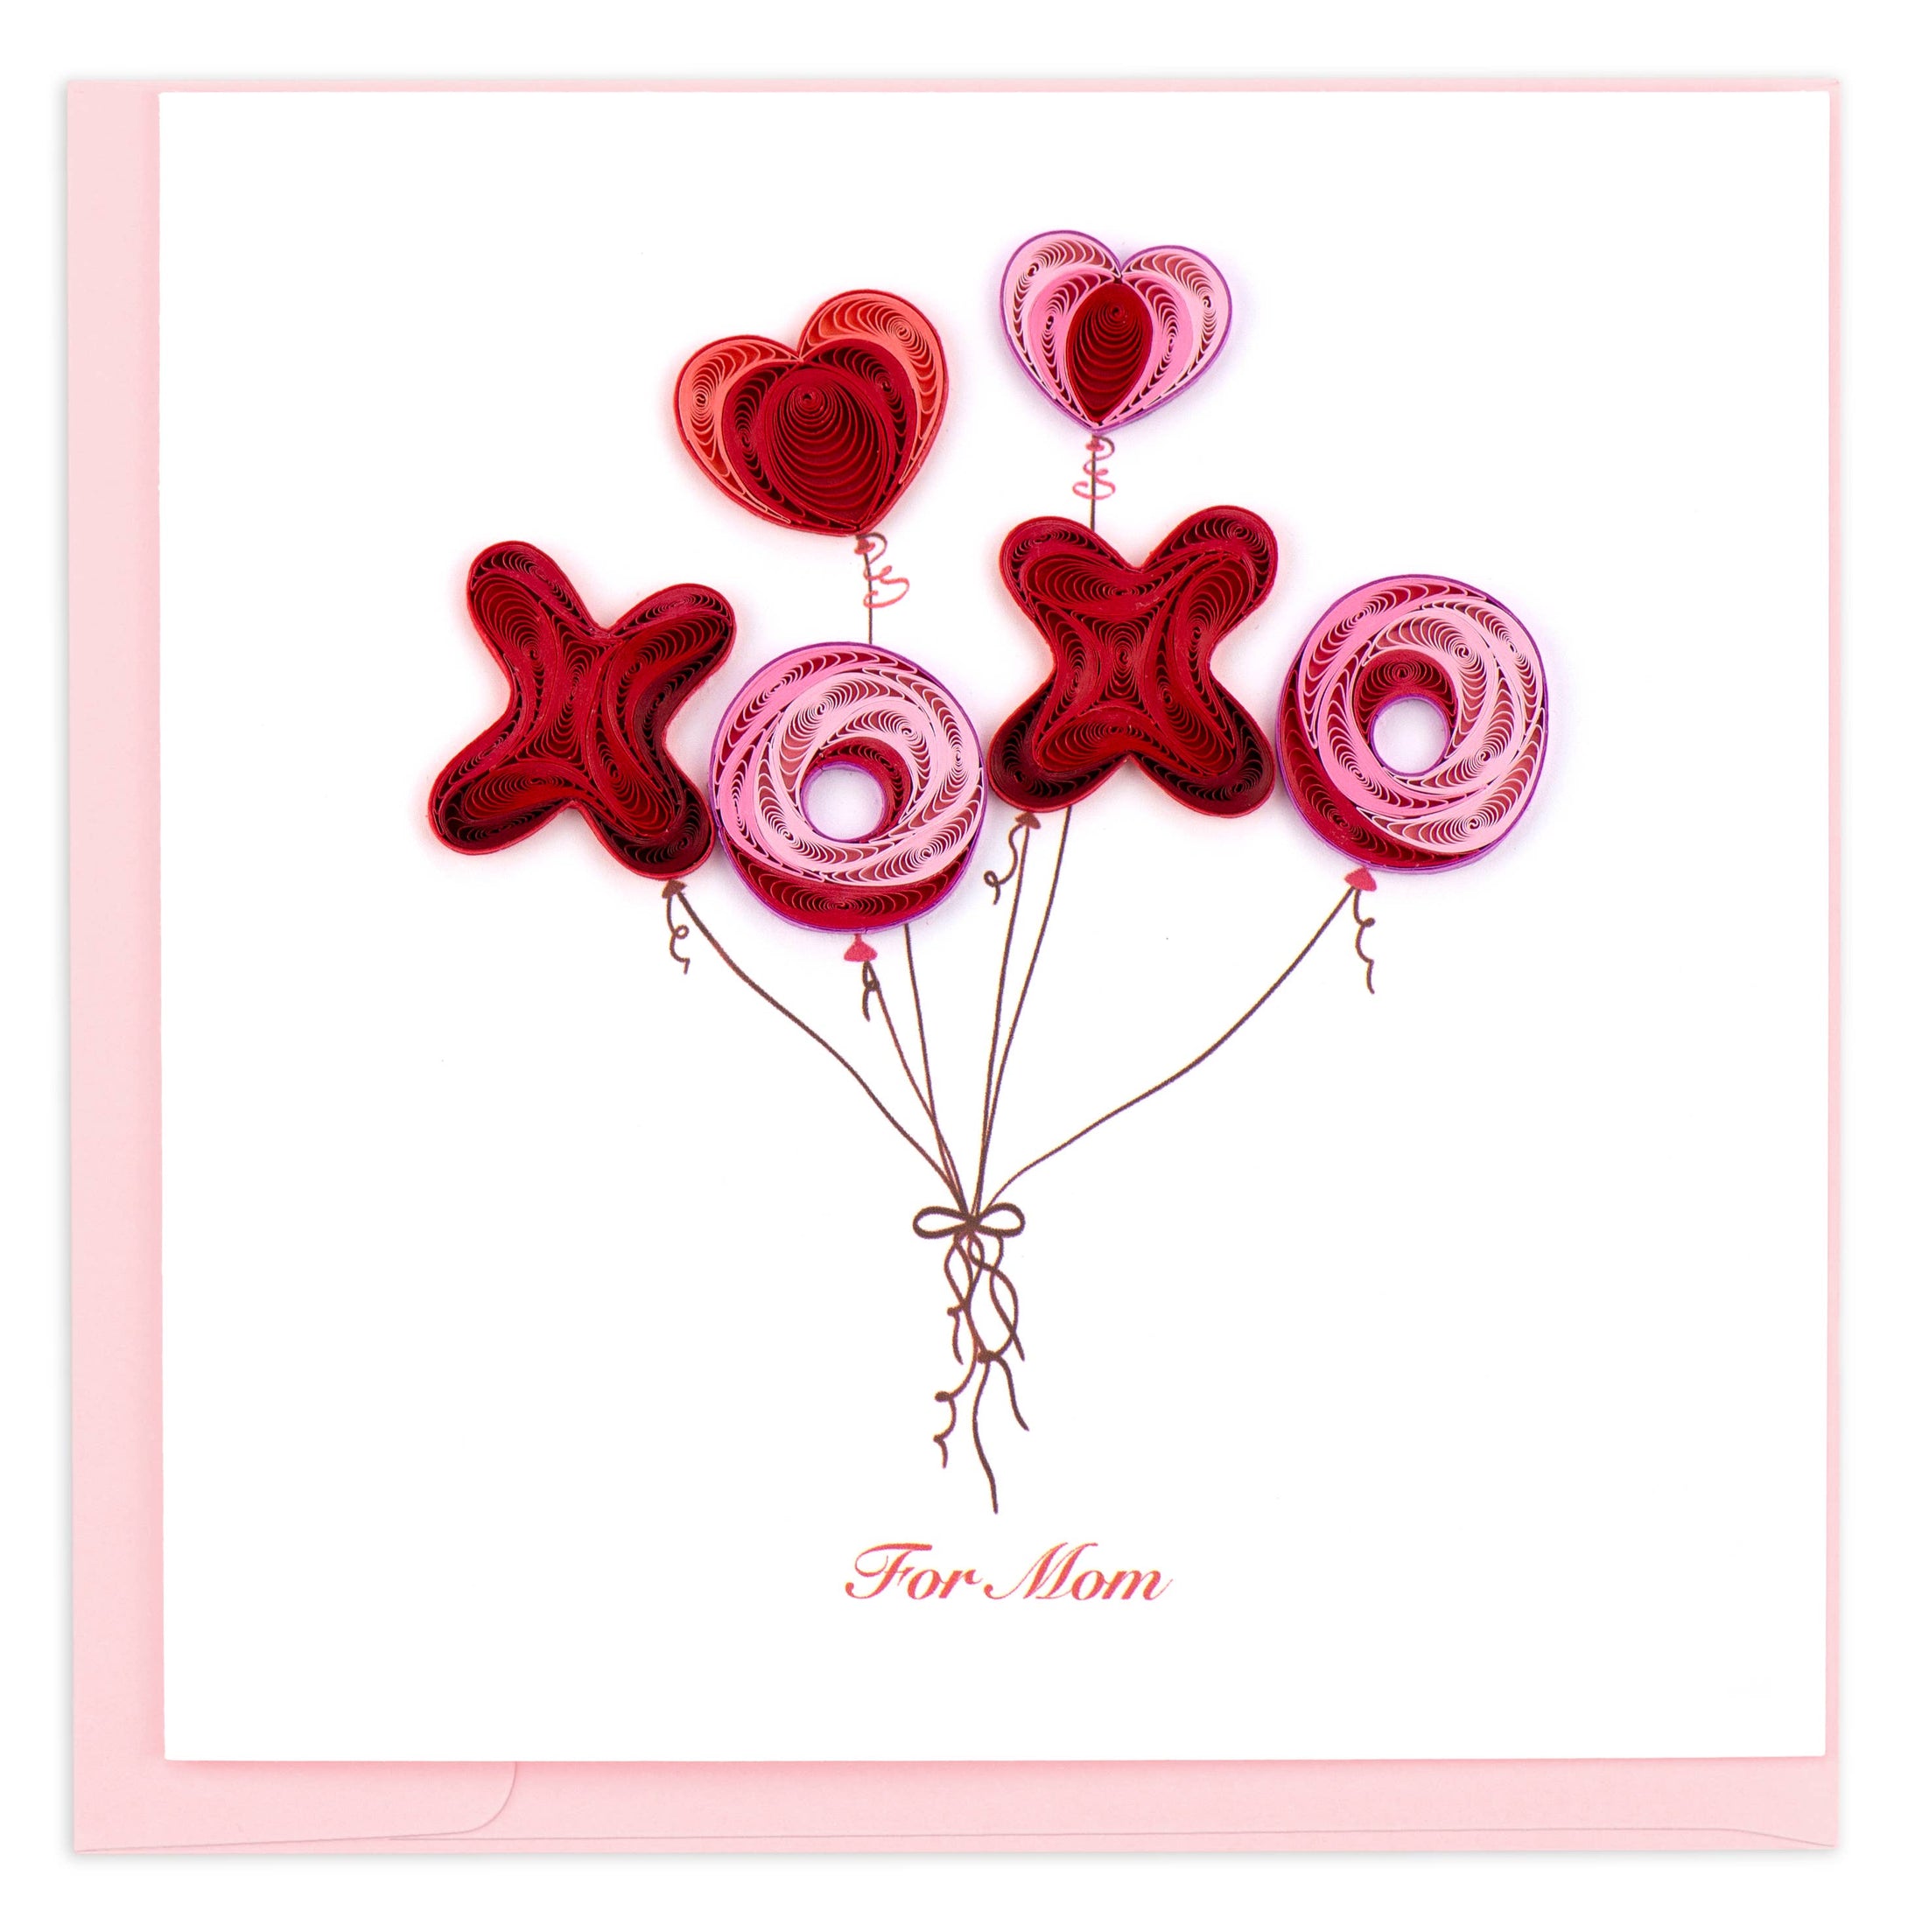 NIQUEA.D Quilled XOXO Balloons Valentine's Day Card